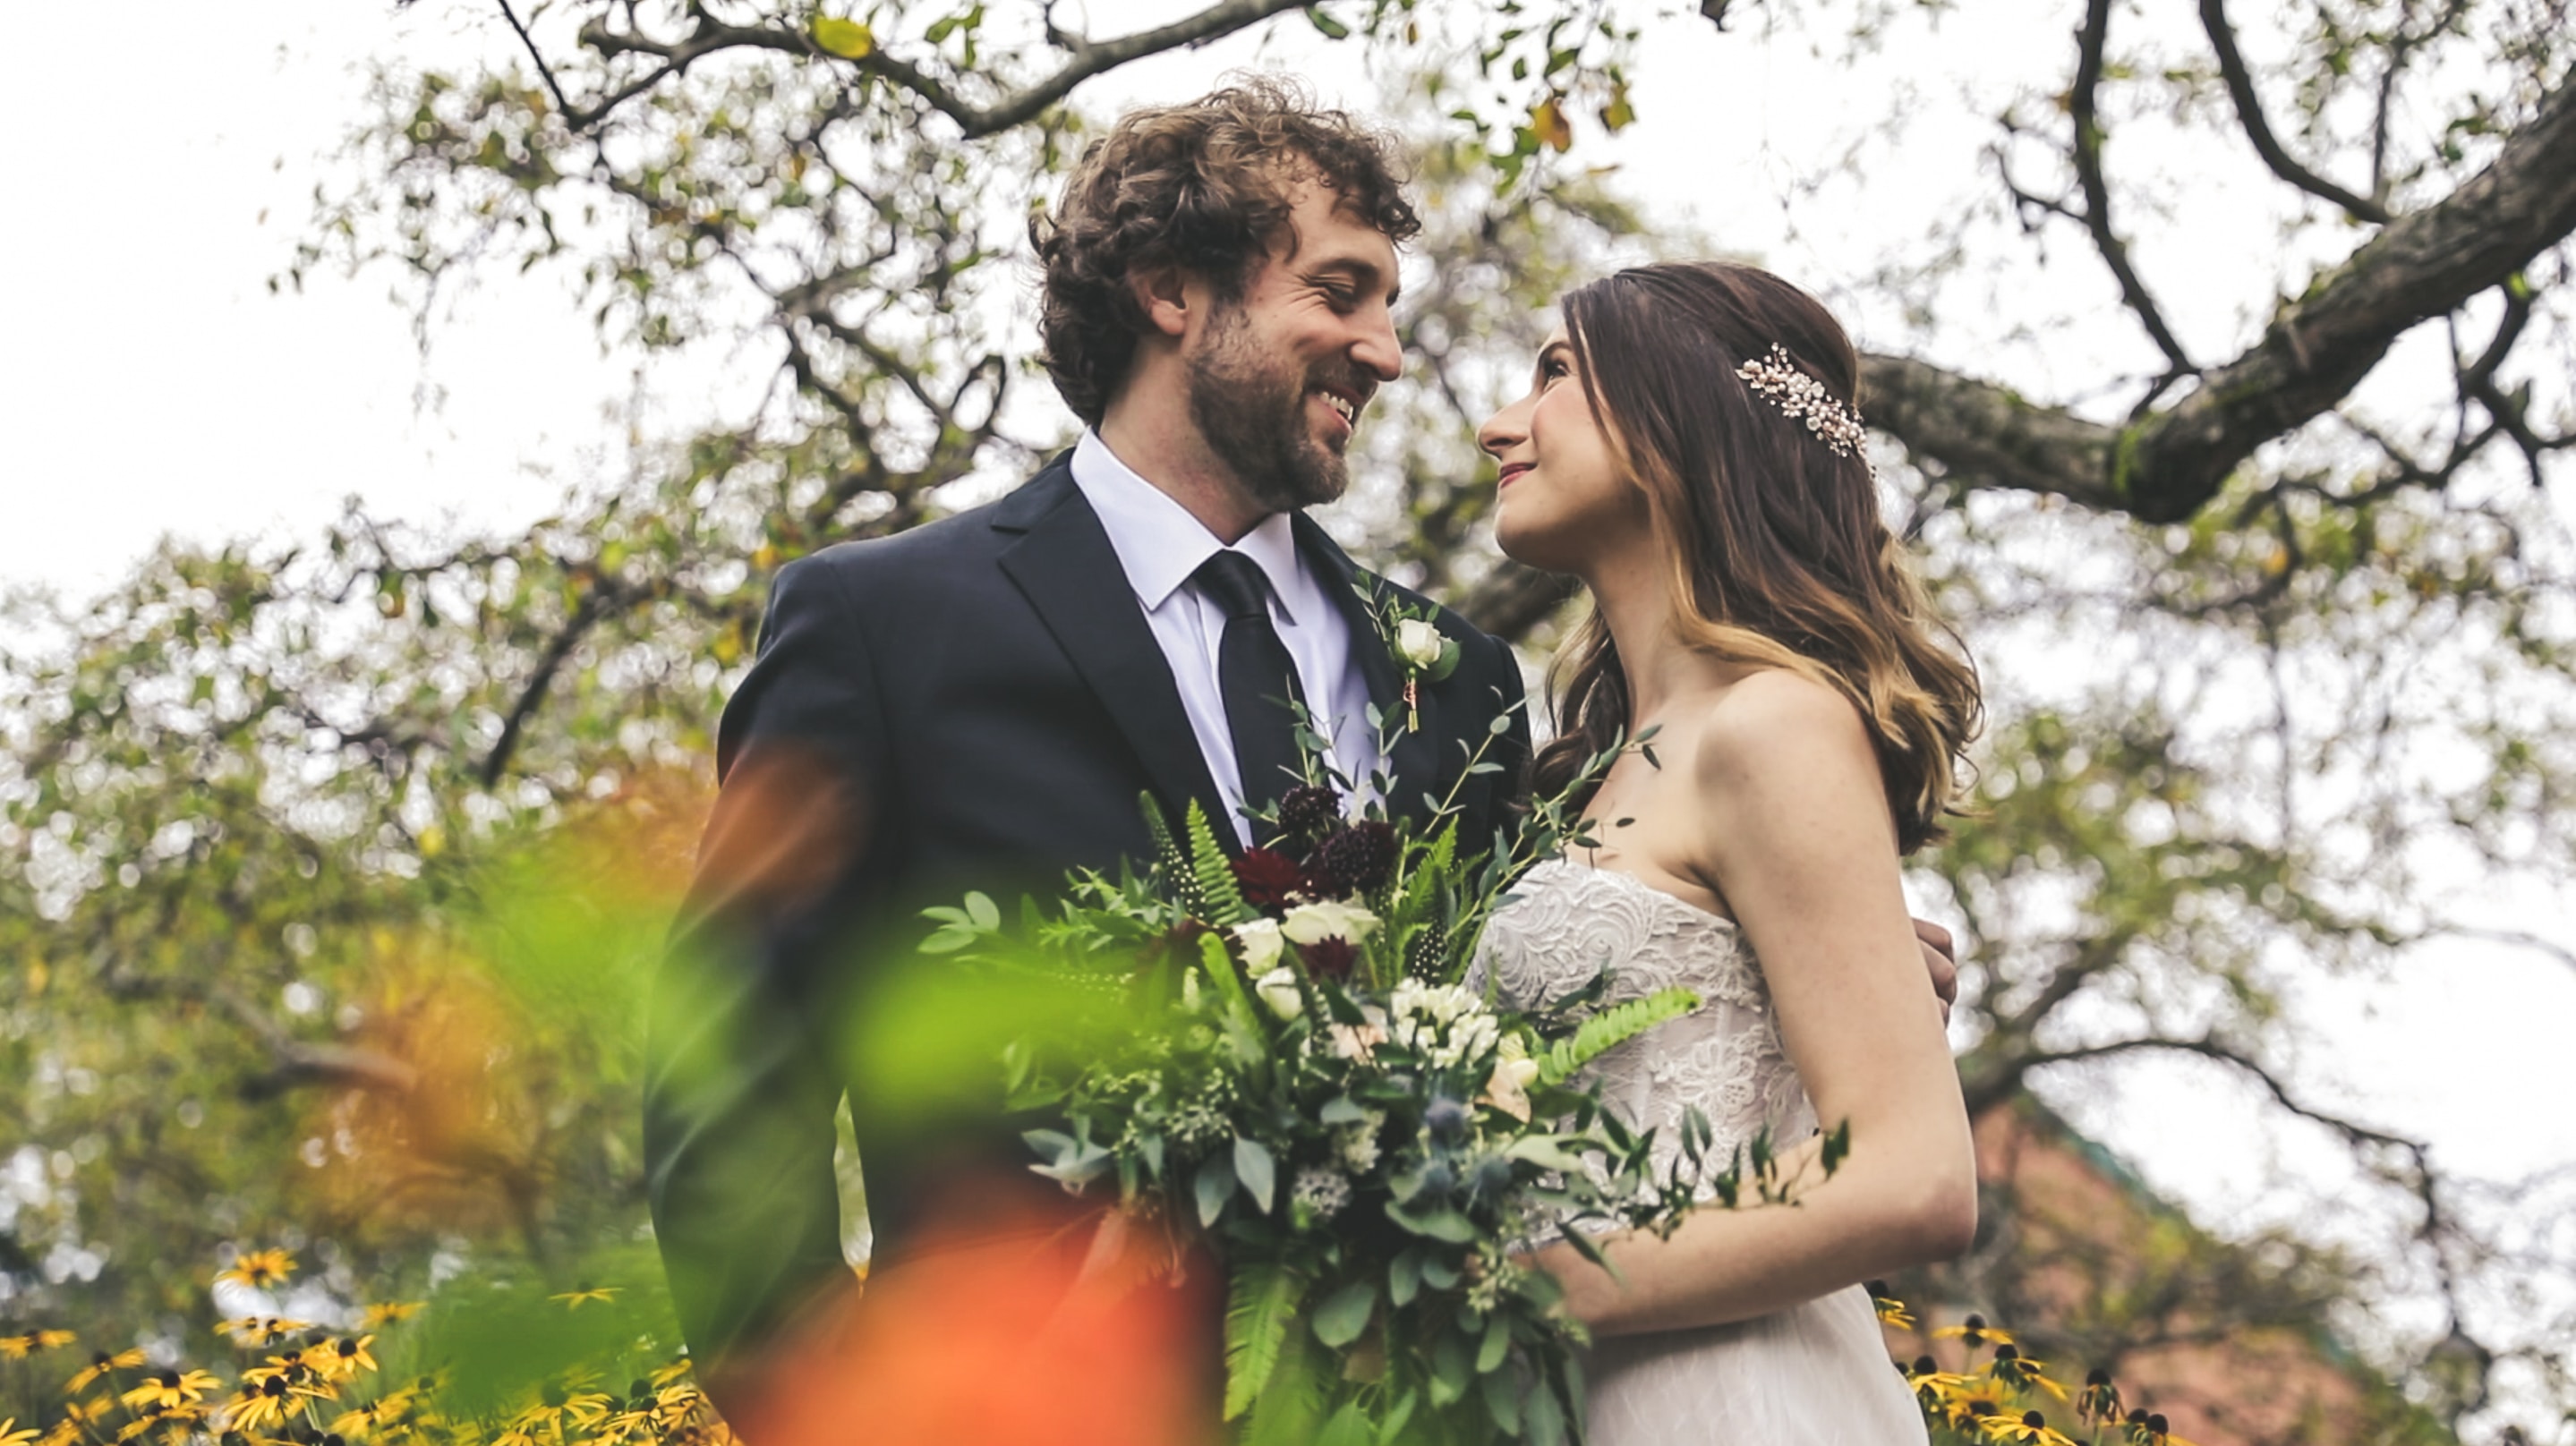 5 Tips for a Budget-Friendly Wedding in 2020